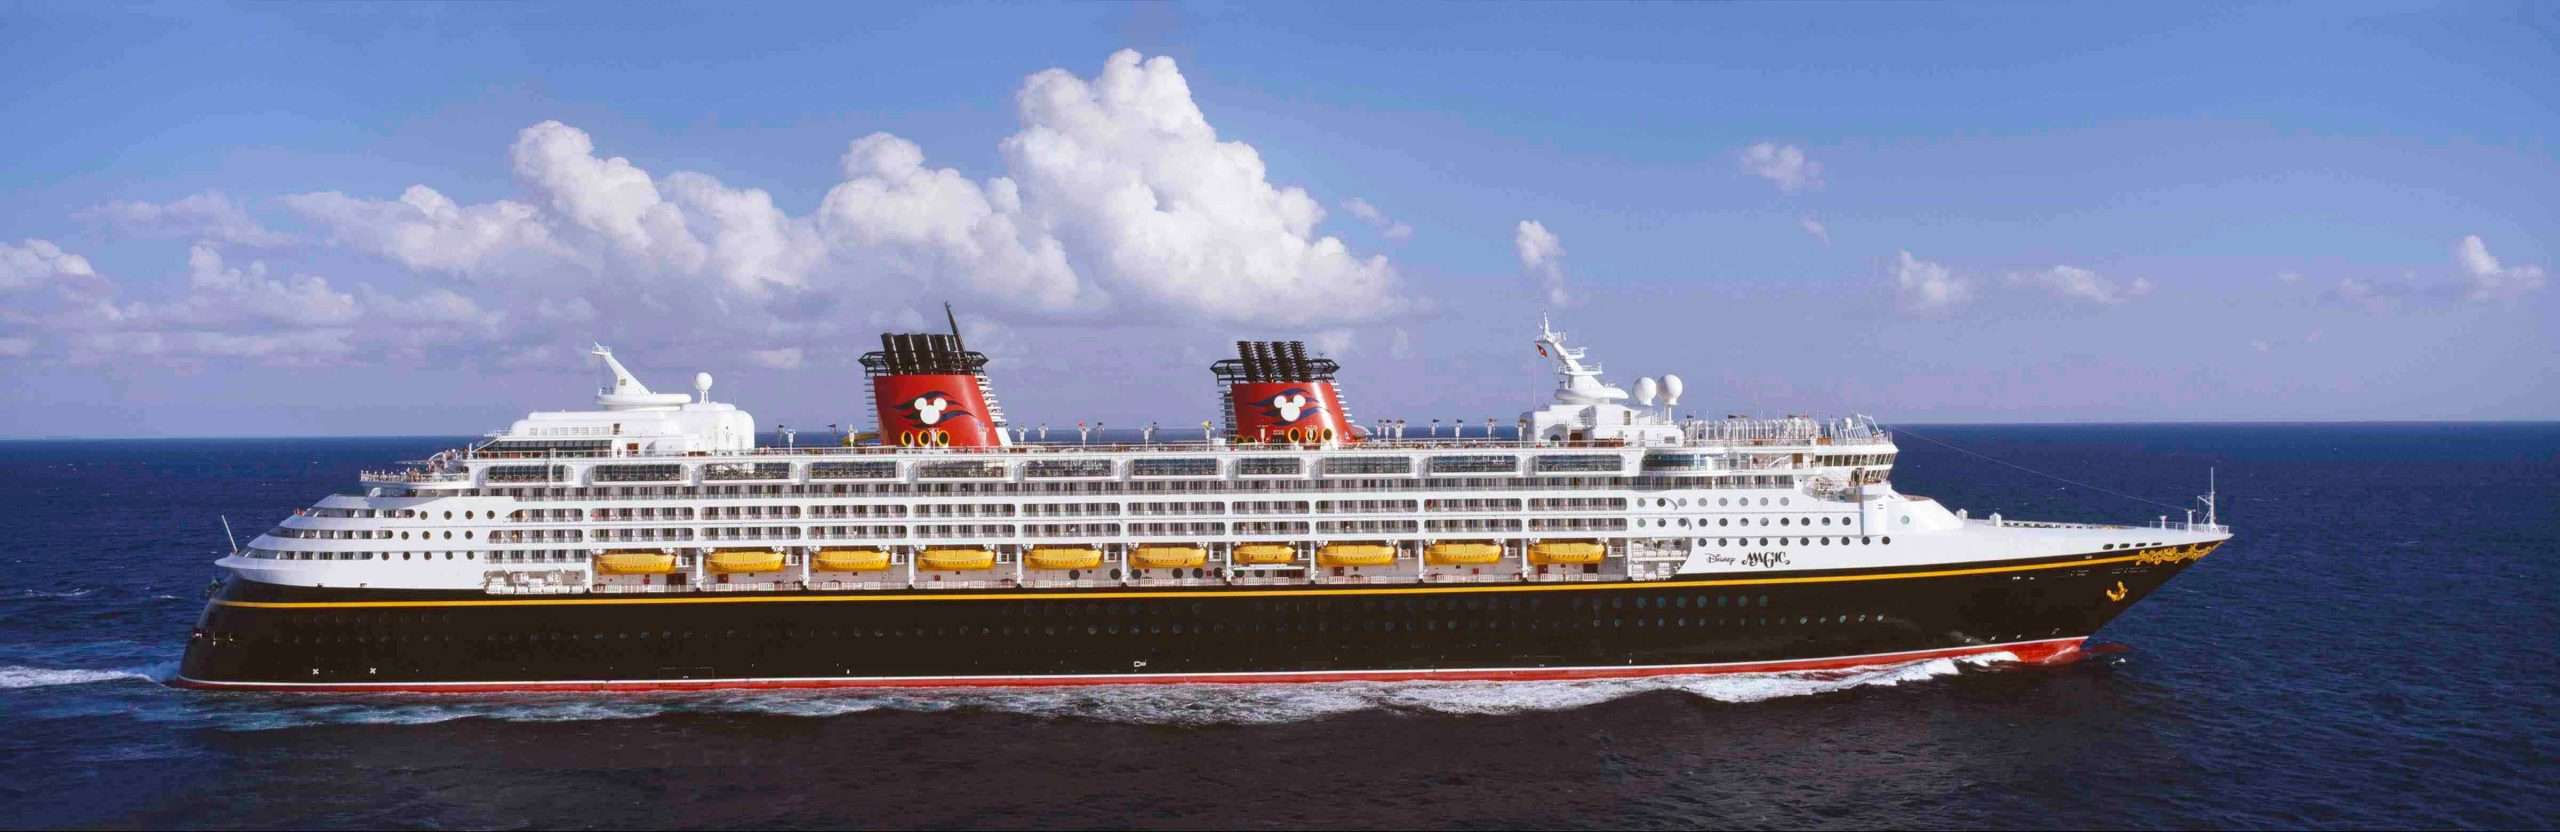 Disney Cruise Line to sail out of New York from 2012 ...